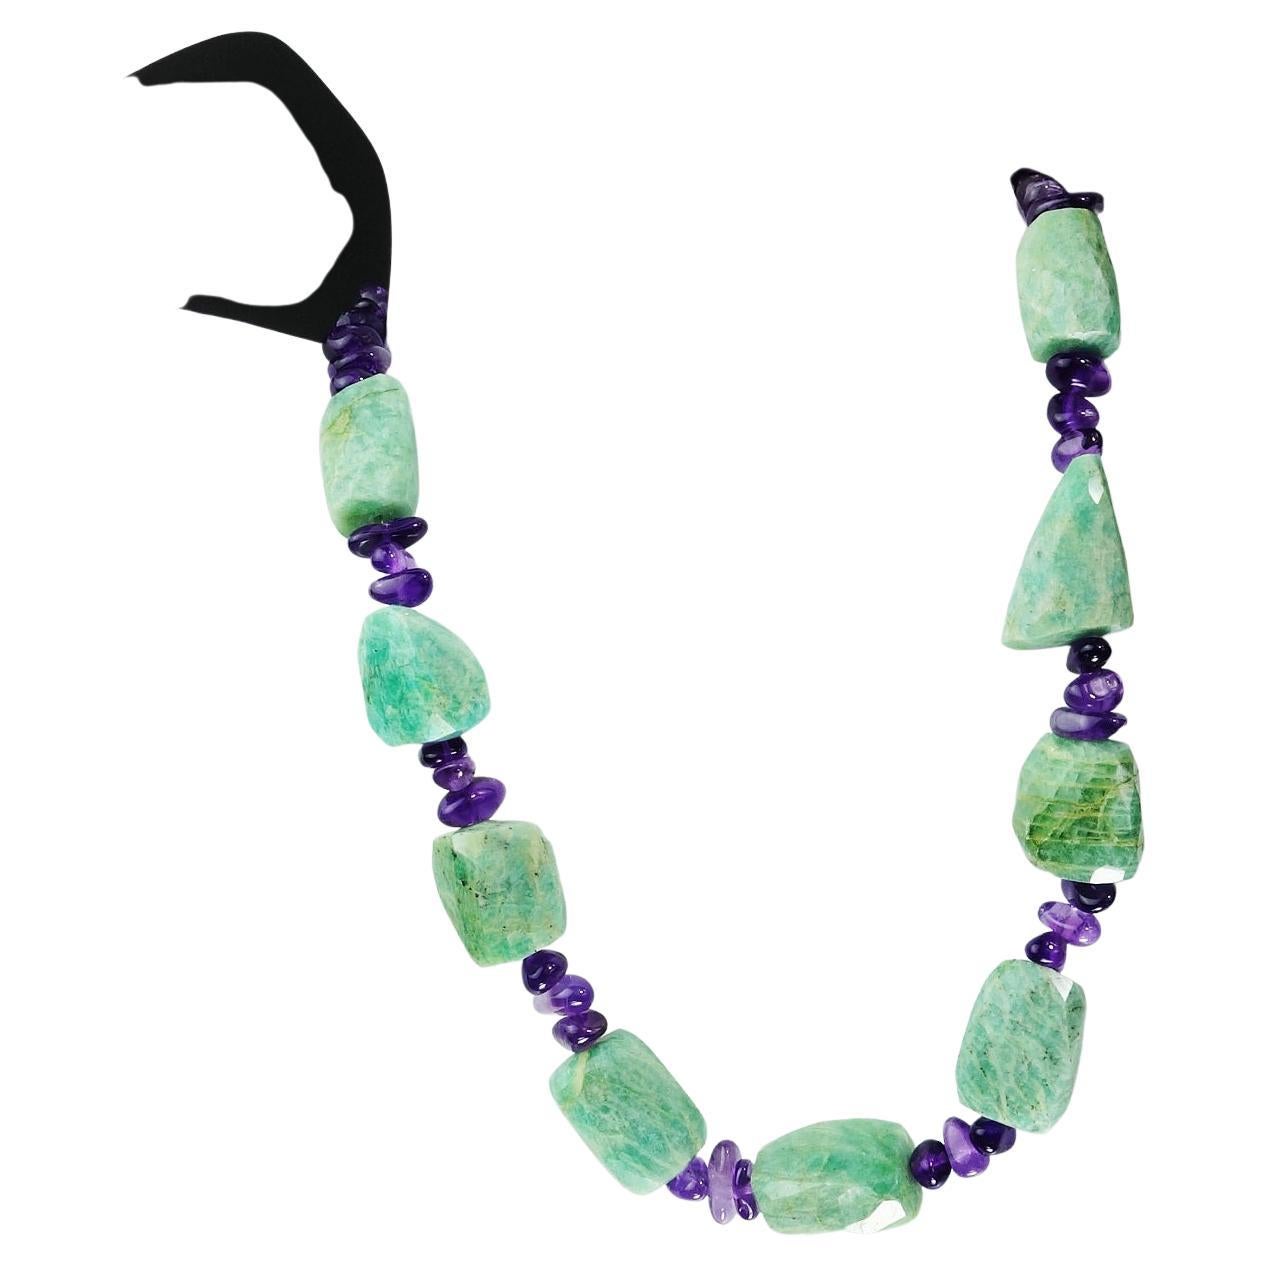 Interesting chunks of green Amazonite separated and set off with tumbled and highly polished Amethyst. The combination of soft green and bright purple is unbeatable. The necklace is 17 inches and secured with a silver tone toggle. Amethyst is the